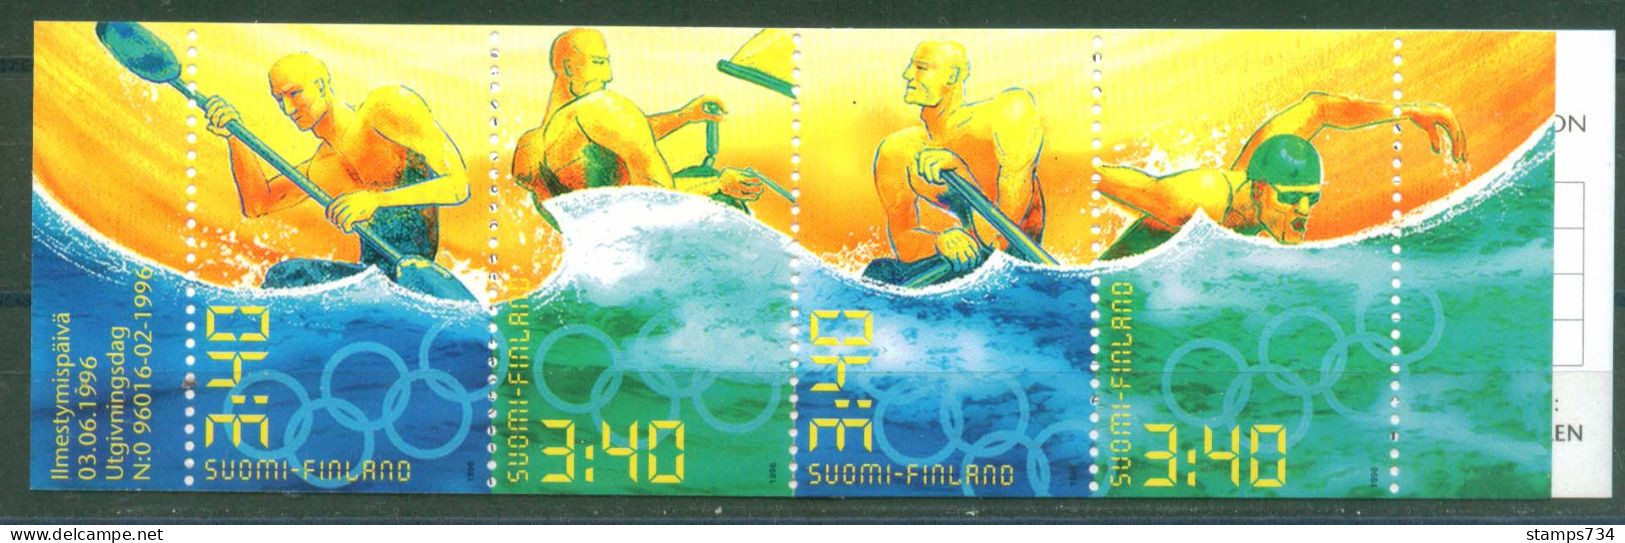 Finland 1996 - Summer Olympic Games , Athlanta, MH 43, MNH** - Booklets